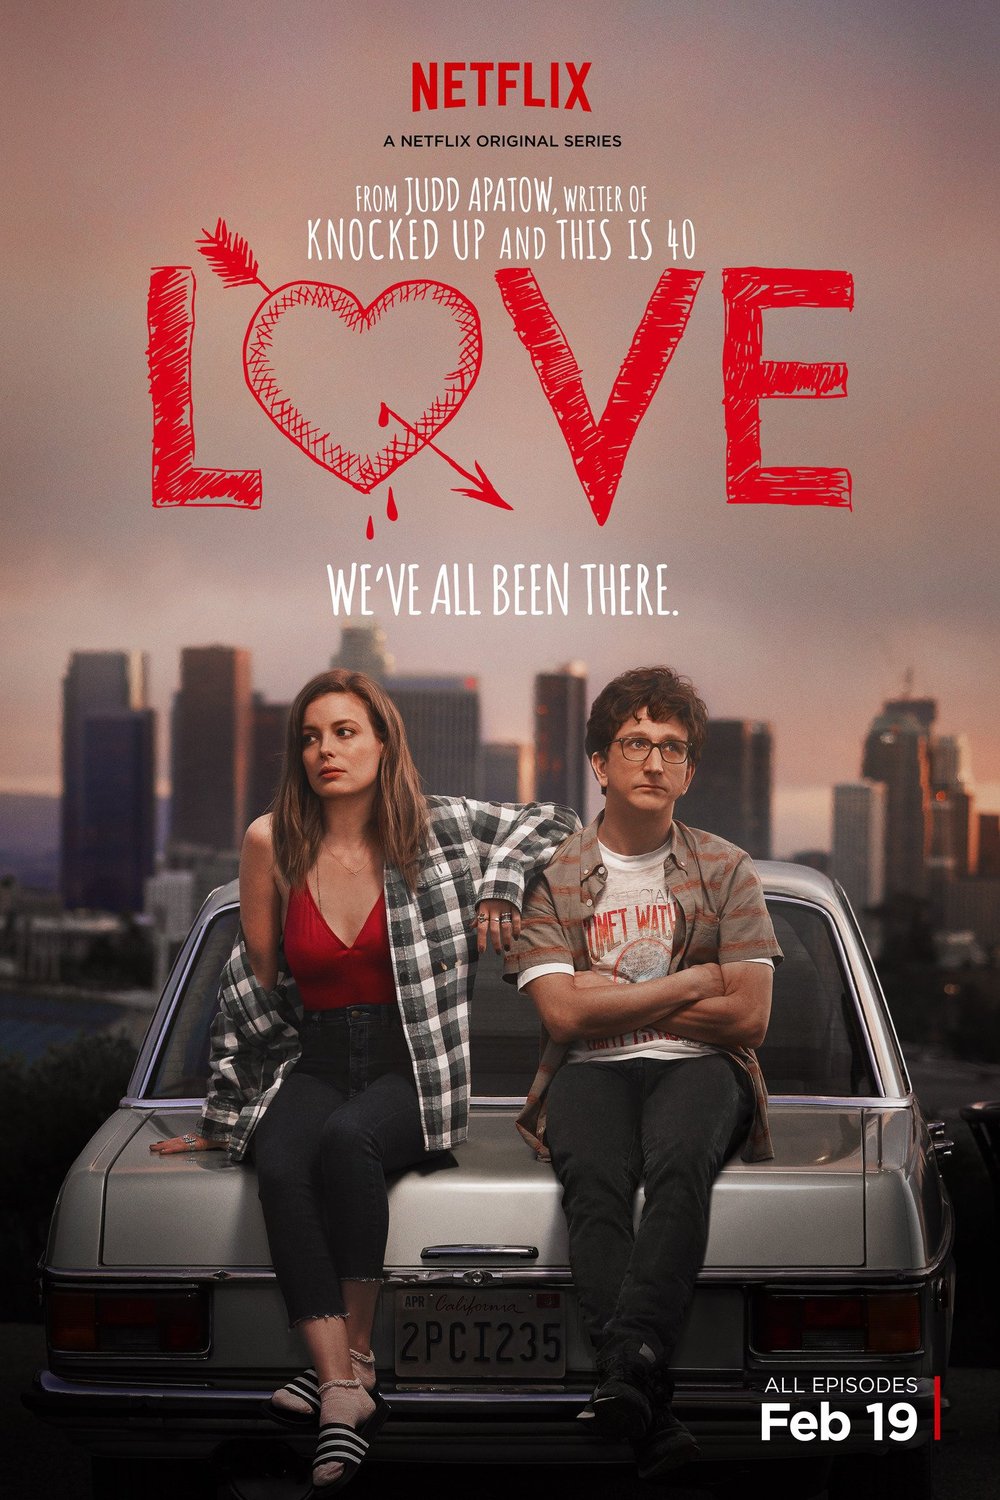 Poster of the movie Love